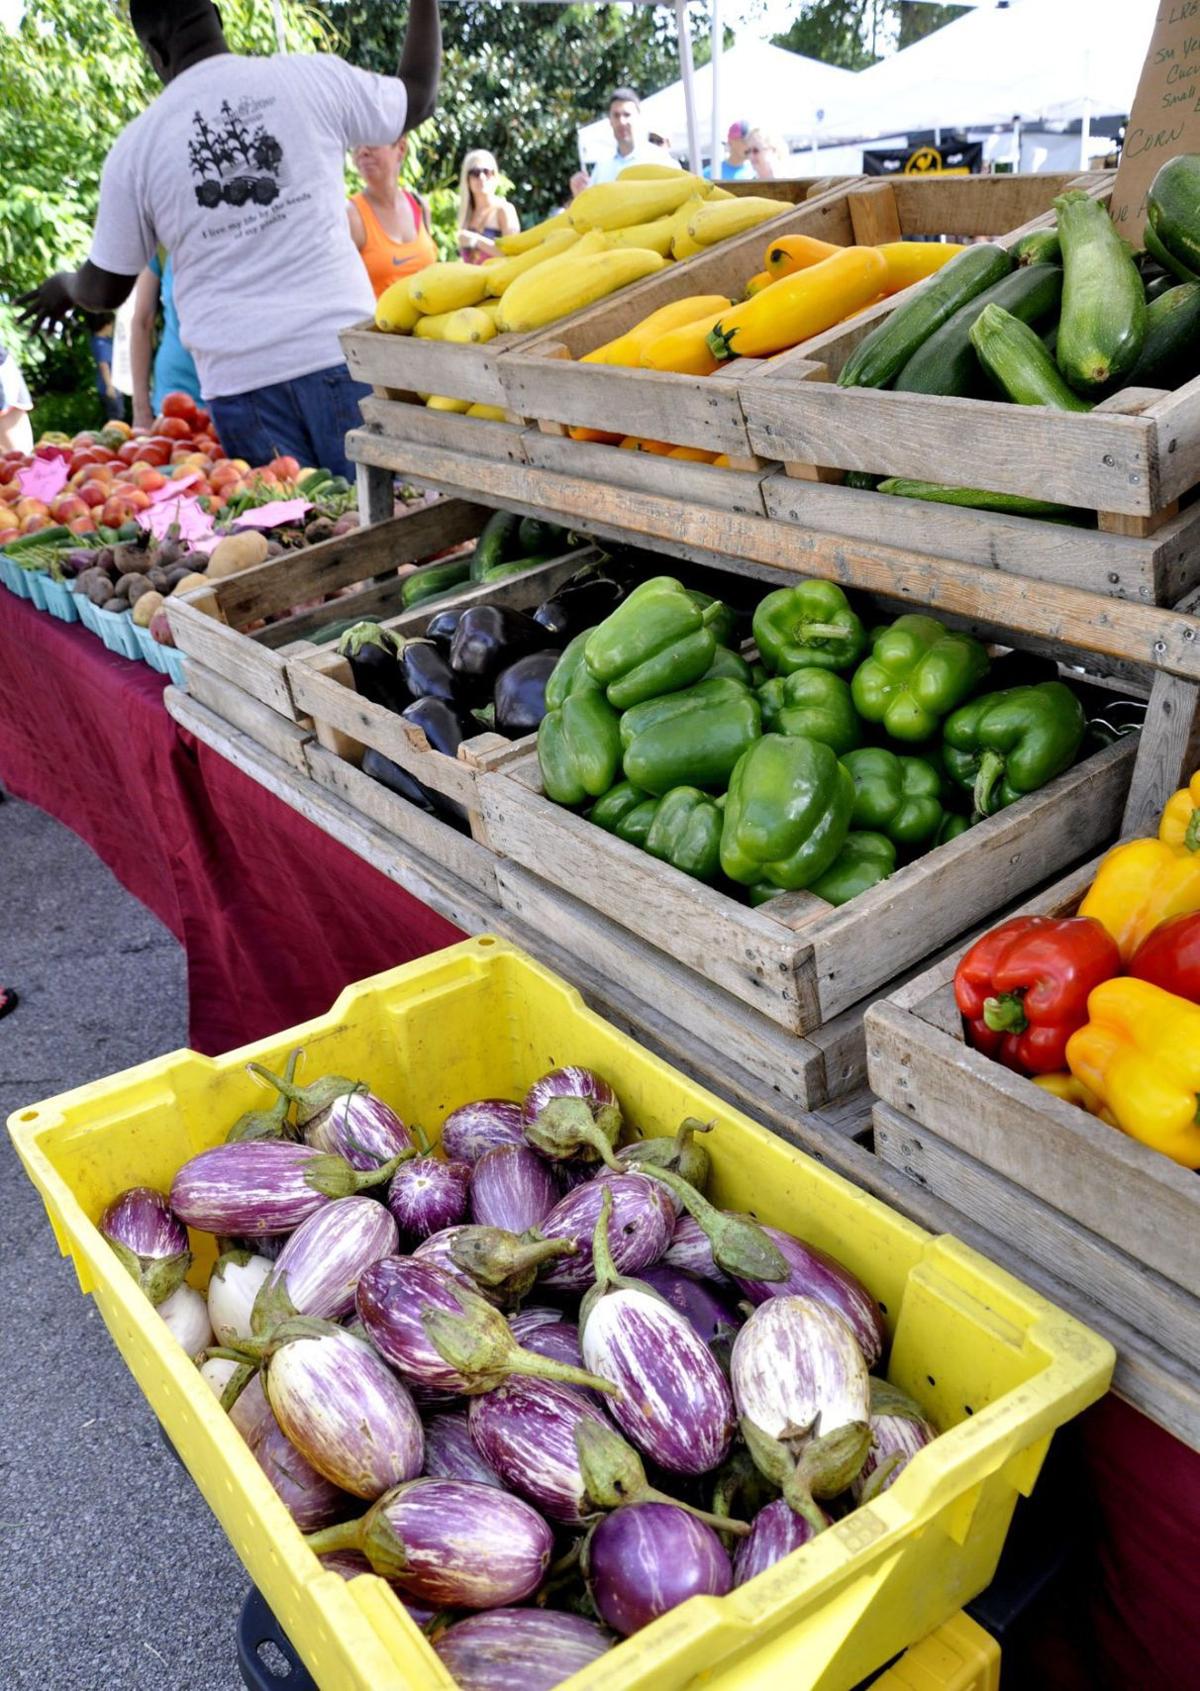 Where to find farmers markets in the St. Louis area | Food and cooking | www.bagssaleusa.com